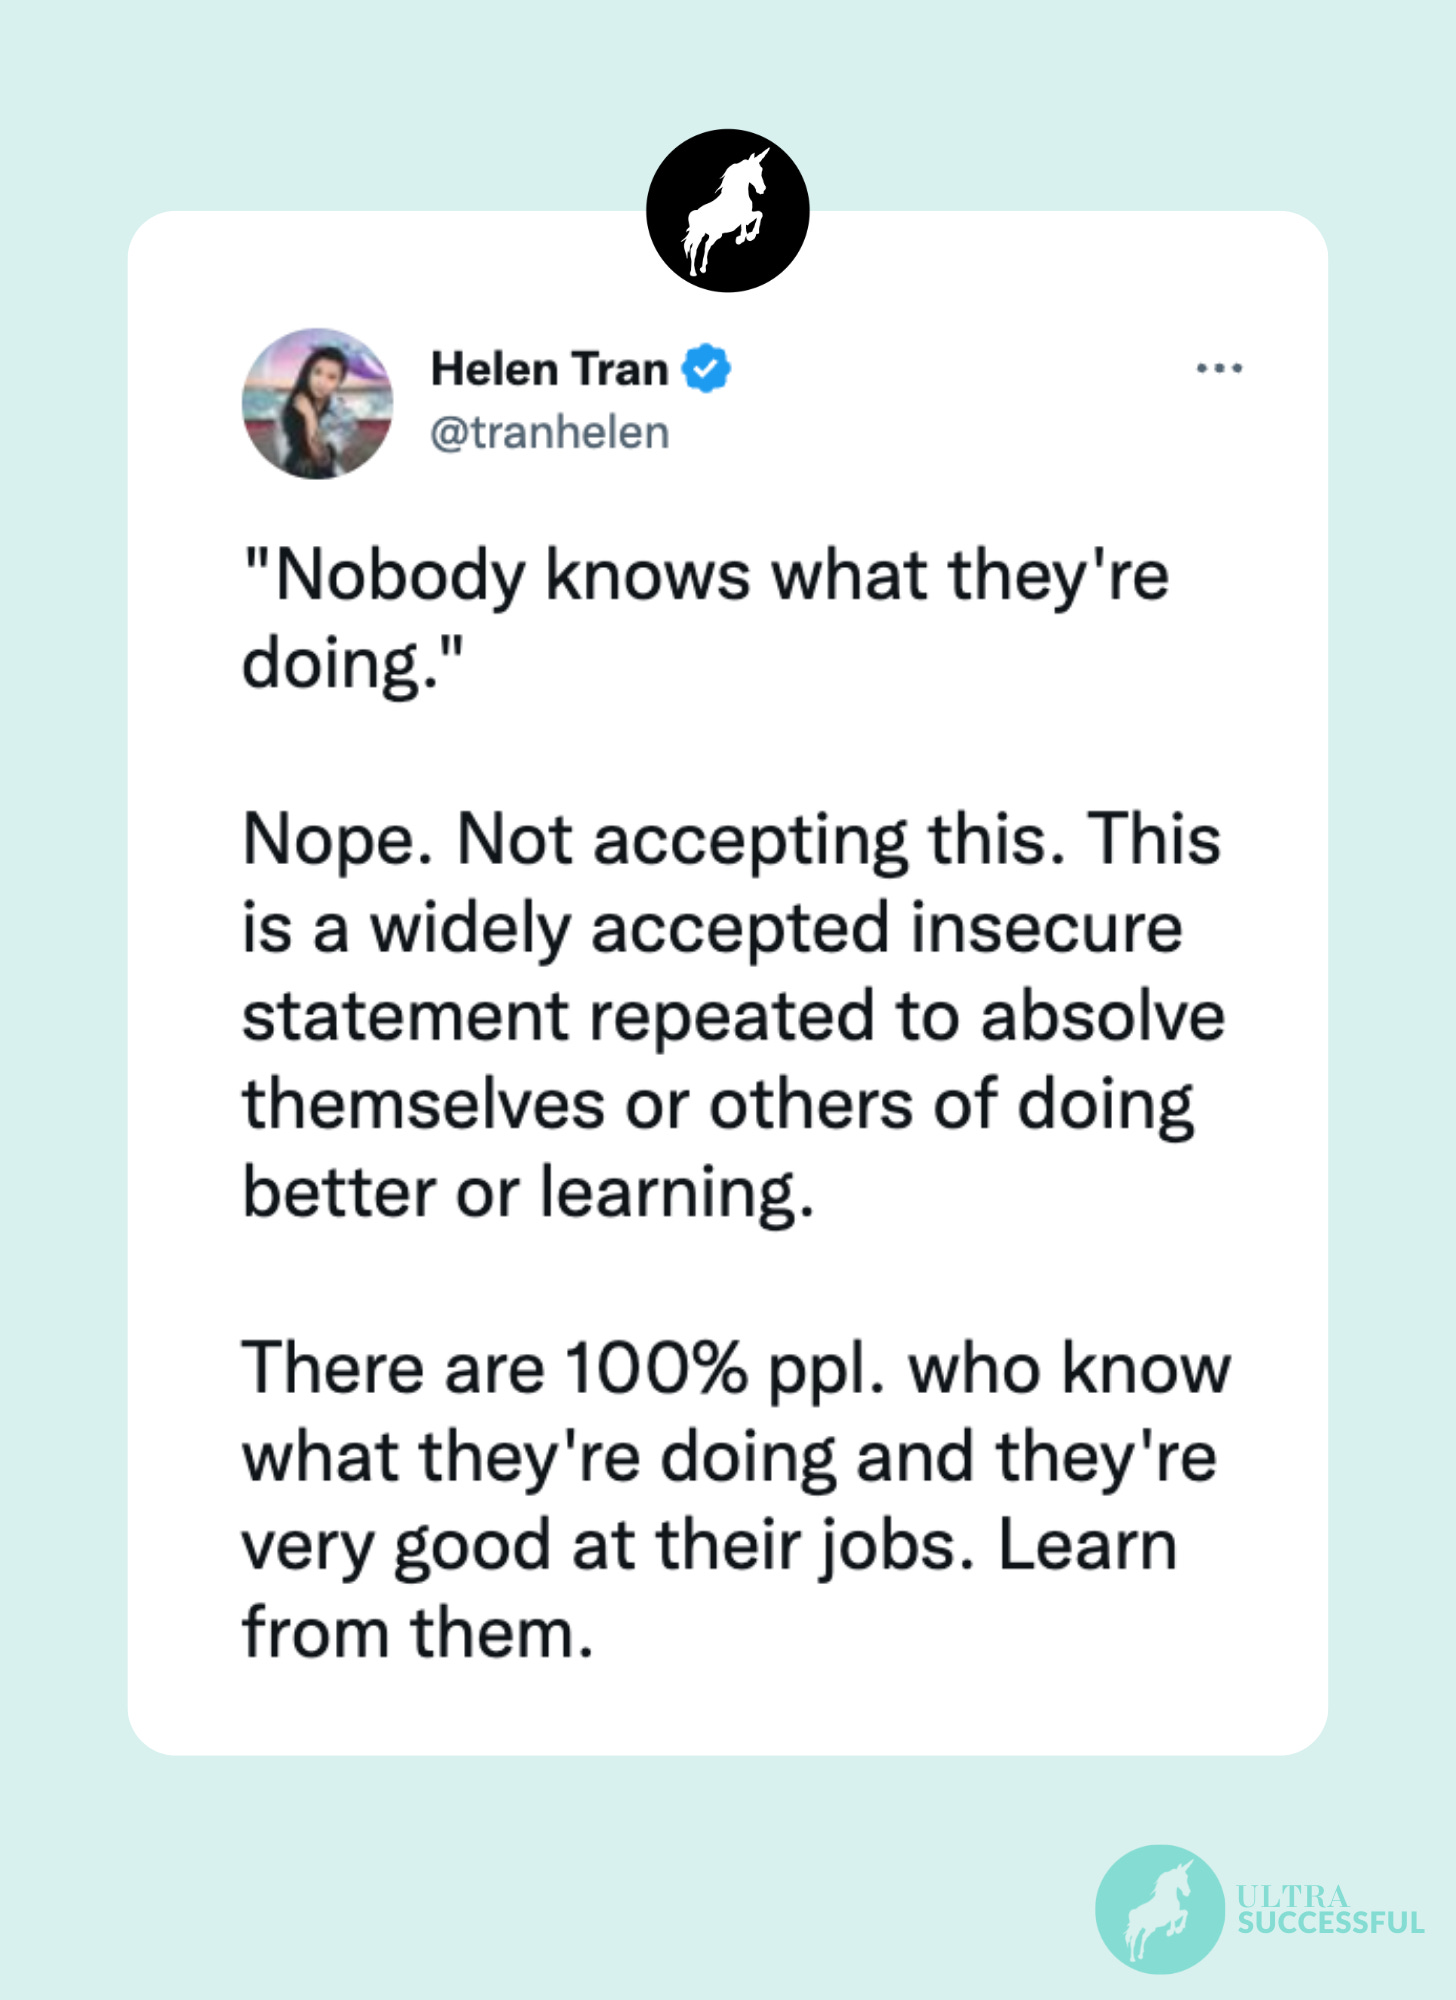 @tranhelen: "Nobody knows what they're doing."  Nope. Not accepting this. This is a widely accepted insecure statement repeated to absolve themselves or others of doing better or learning.  There are 100% ppl. who know what they're doing and they're very good at their jobs. Learn from them.